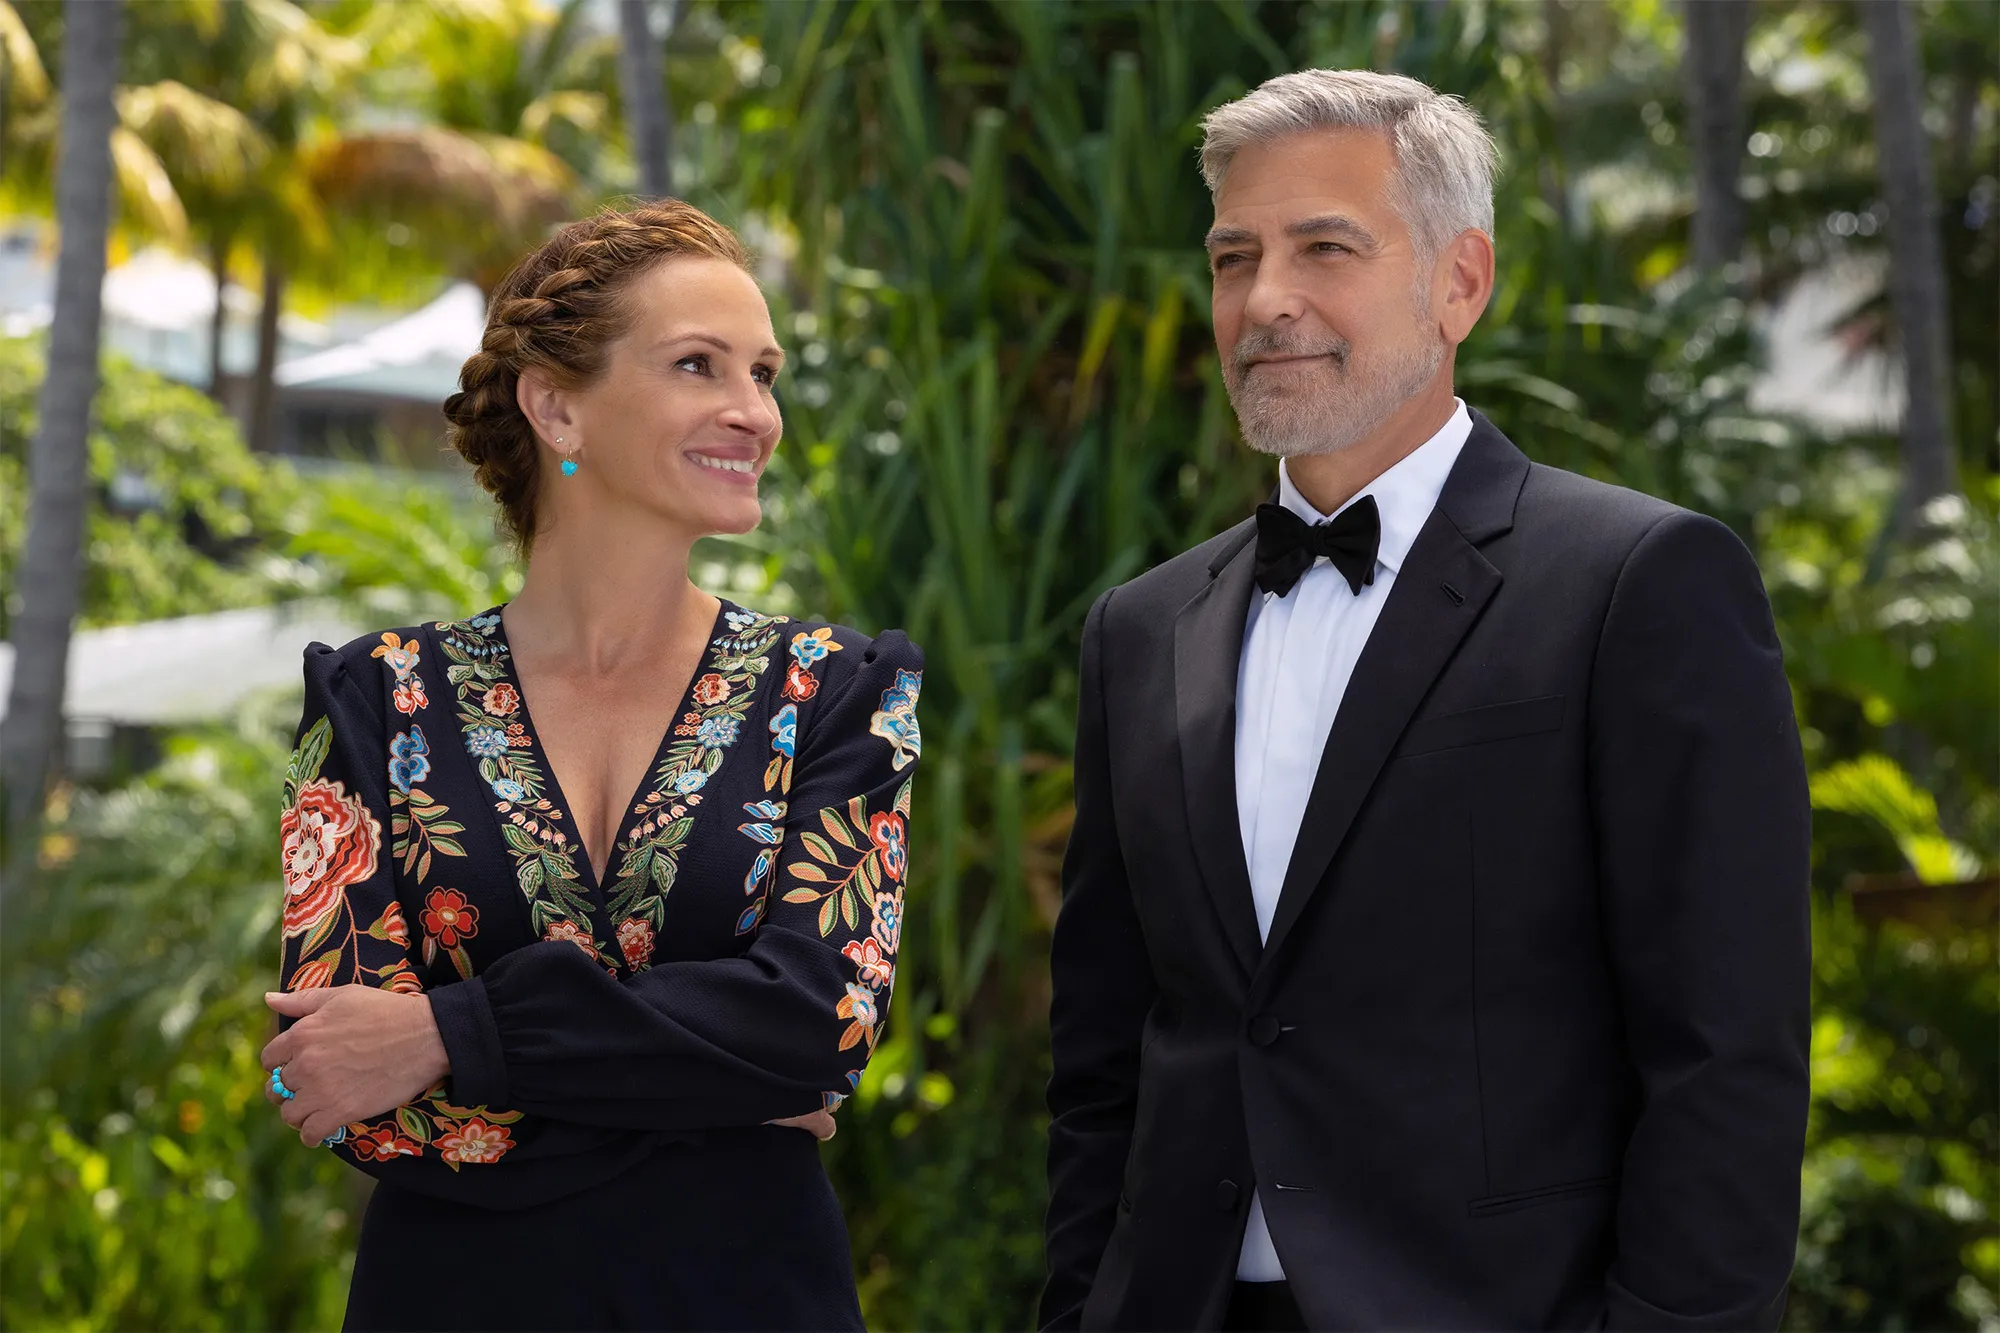 Where to stream the Julia Roberts/George Clooney rom-com
Ticket to Paradise